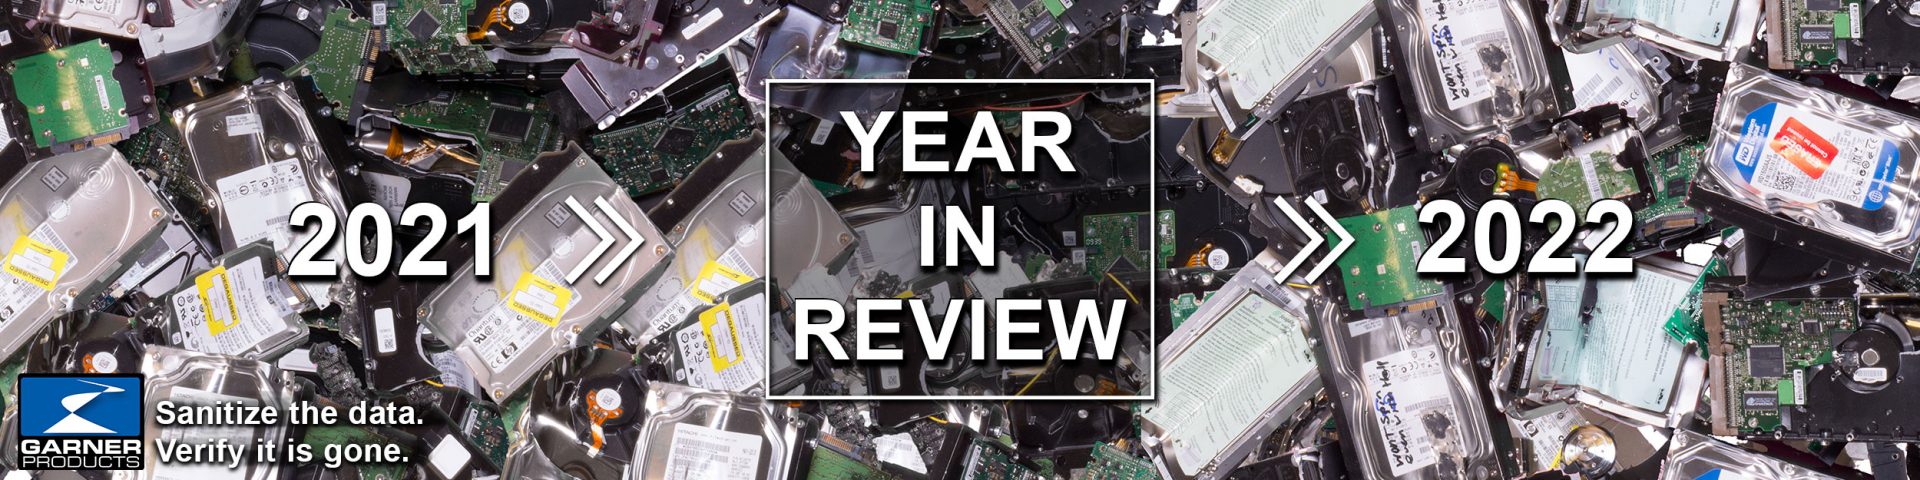 year-in-review-1920x480